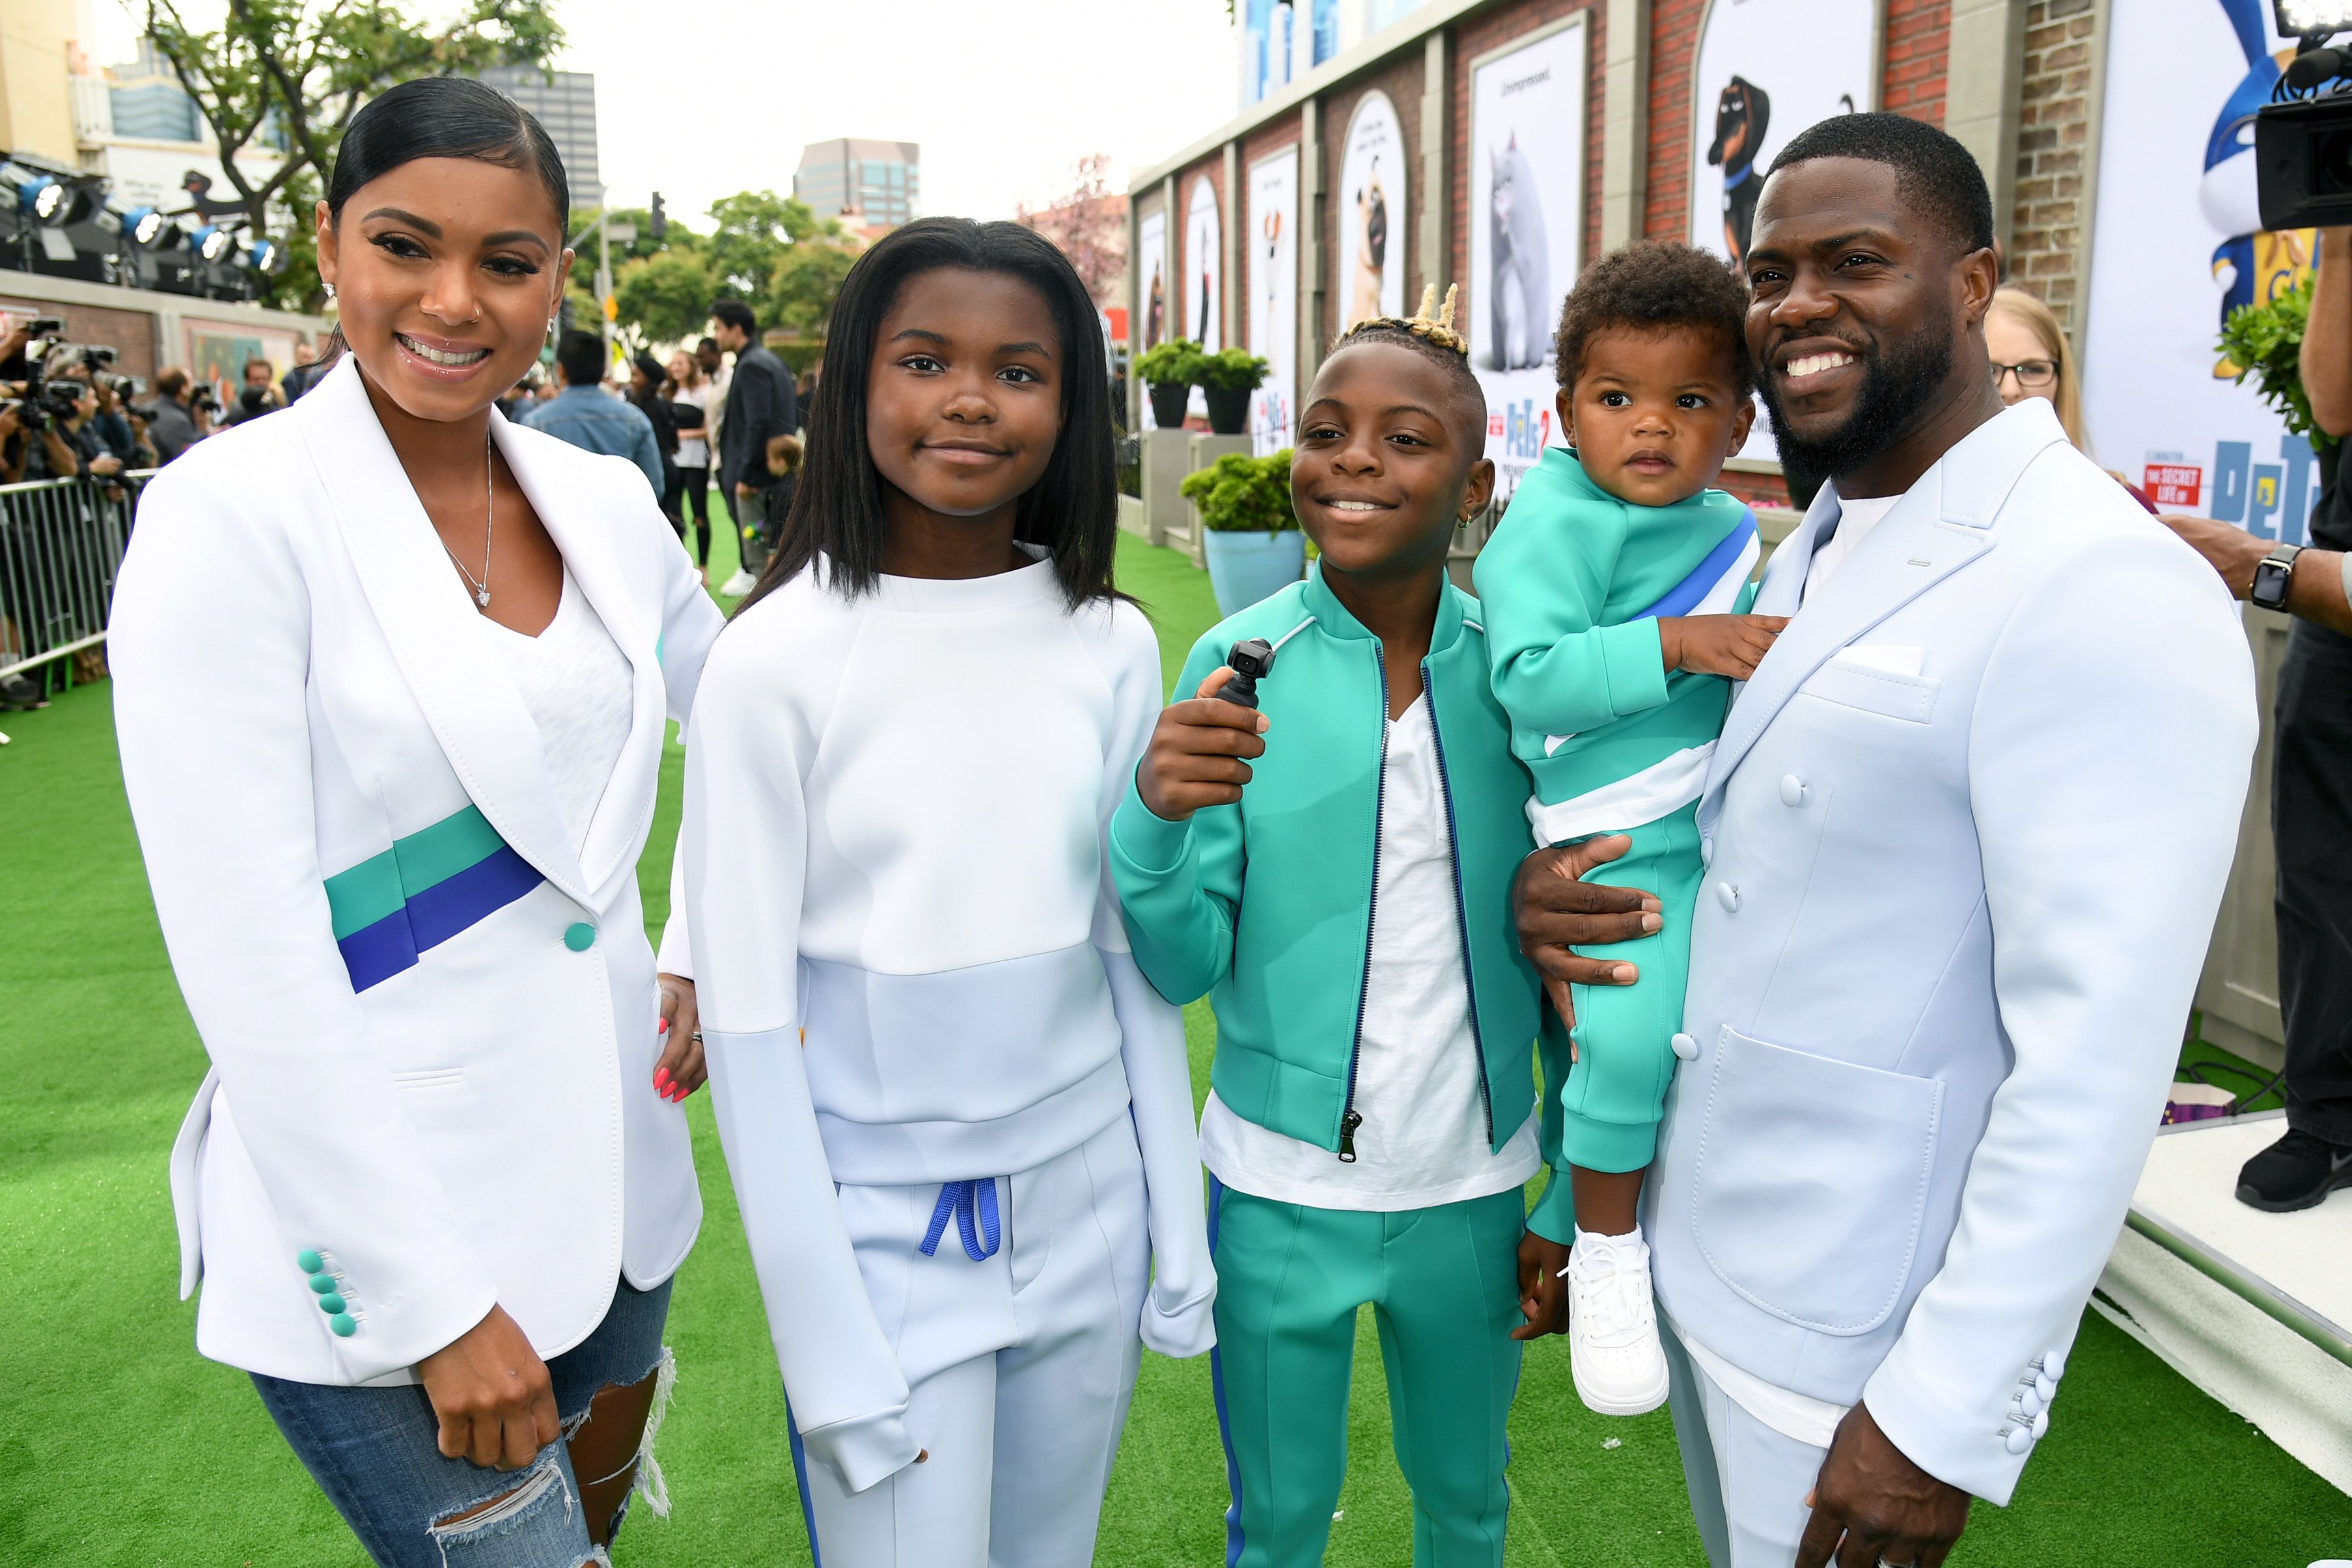 Kevin Hart with his wife Eniko and his children at the premier for "Life Of Pets II"/ Source: Getty Images